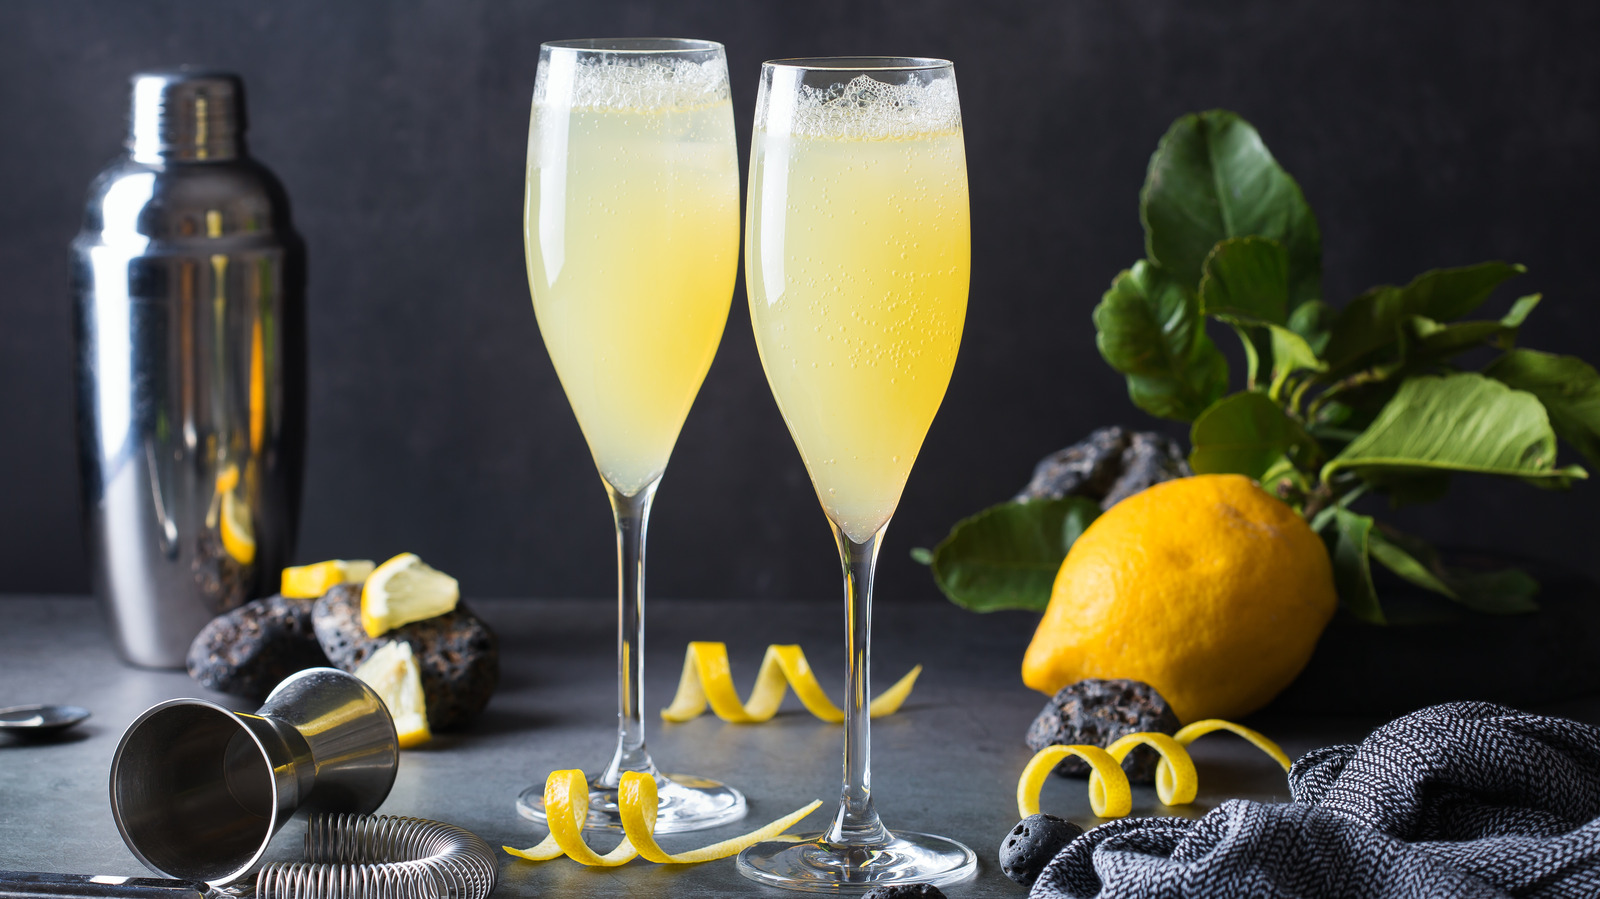 https://www.tastingtable.com/img/gallery/12-cocktails-to-try-if-you-like-drinking-champagne/l-intro-1642792788.jpg